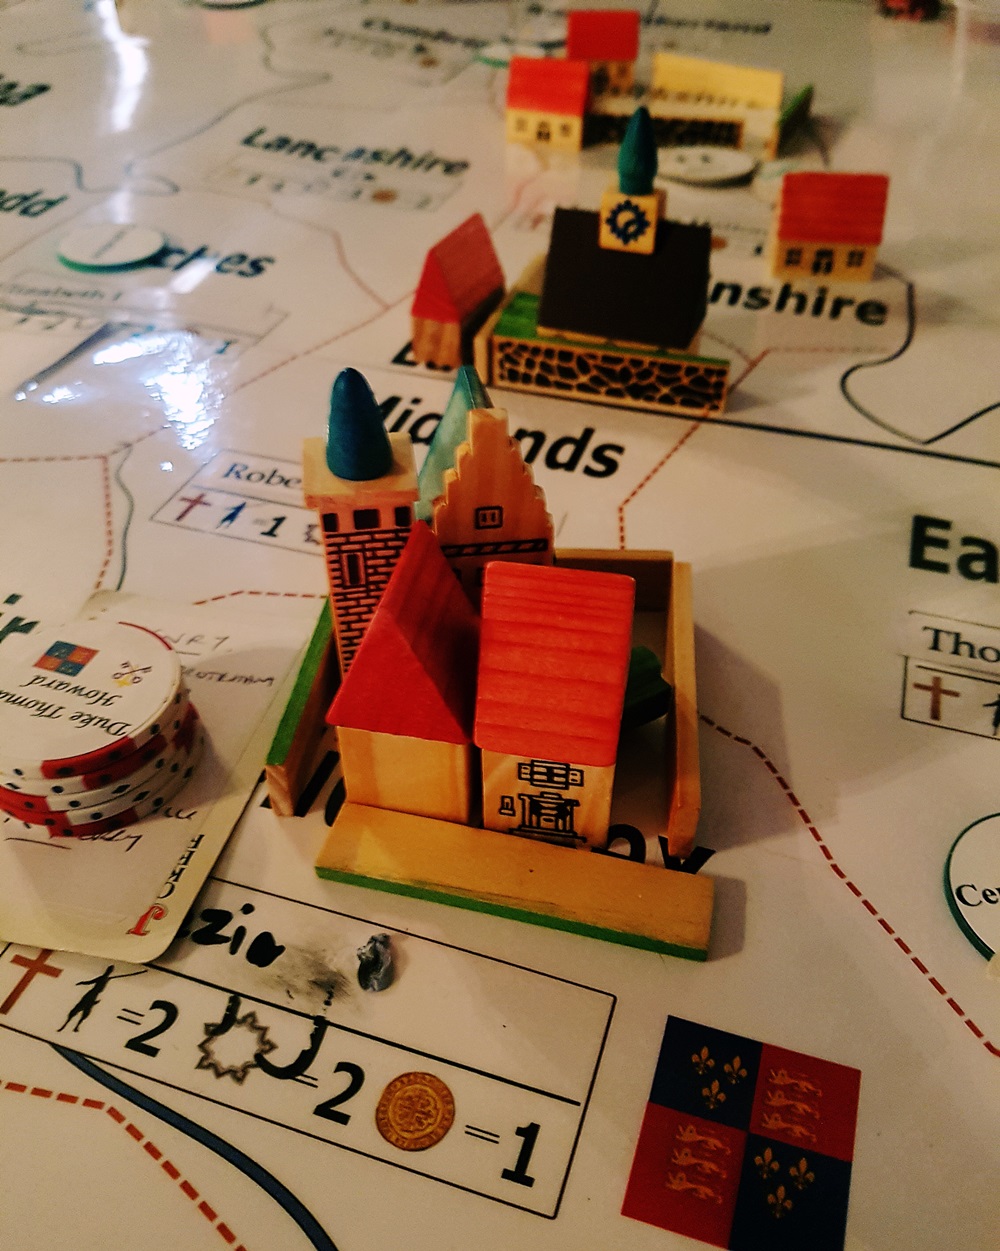 Queen Elizabeth's house in the Spanish Road megagame